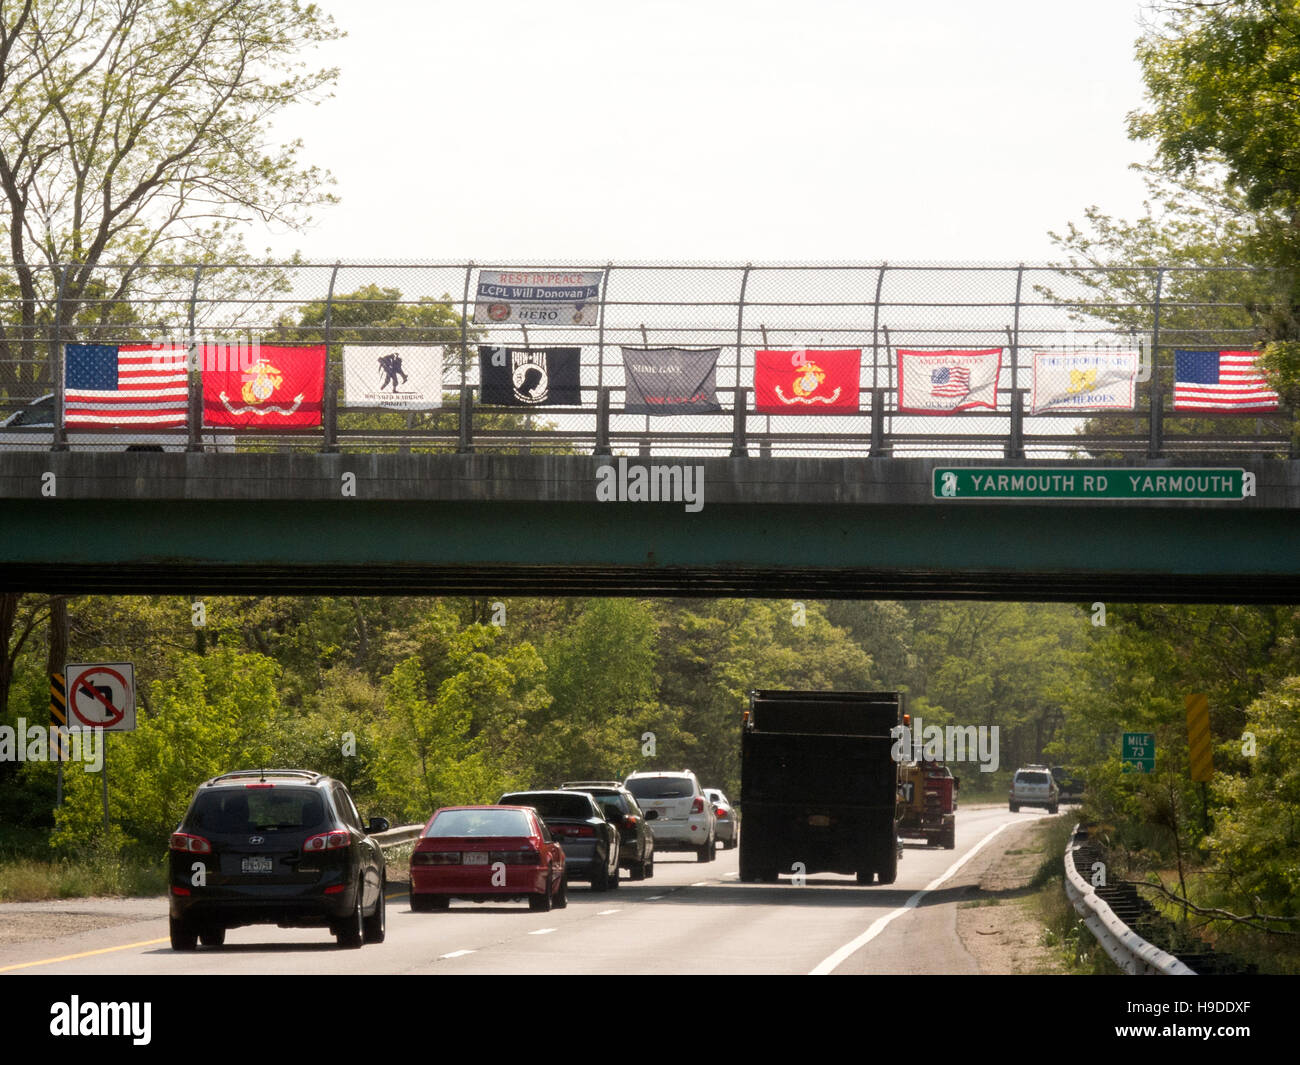 A US flag plus flags of US military services are displayed on a bridge over a Massachusetts highway in observance of Memorial Day. Note Prisoner of War (POW) flag in center. Stock Photo